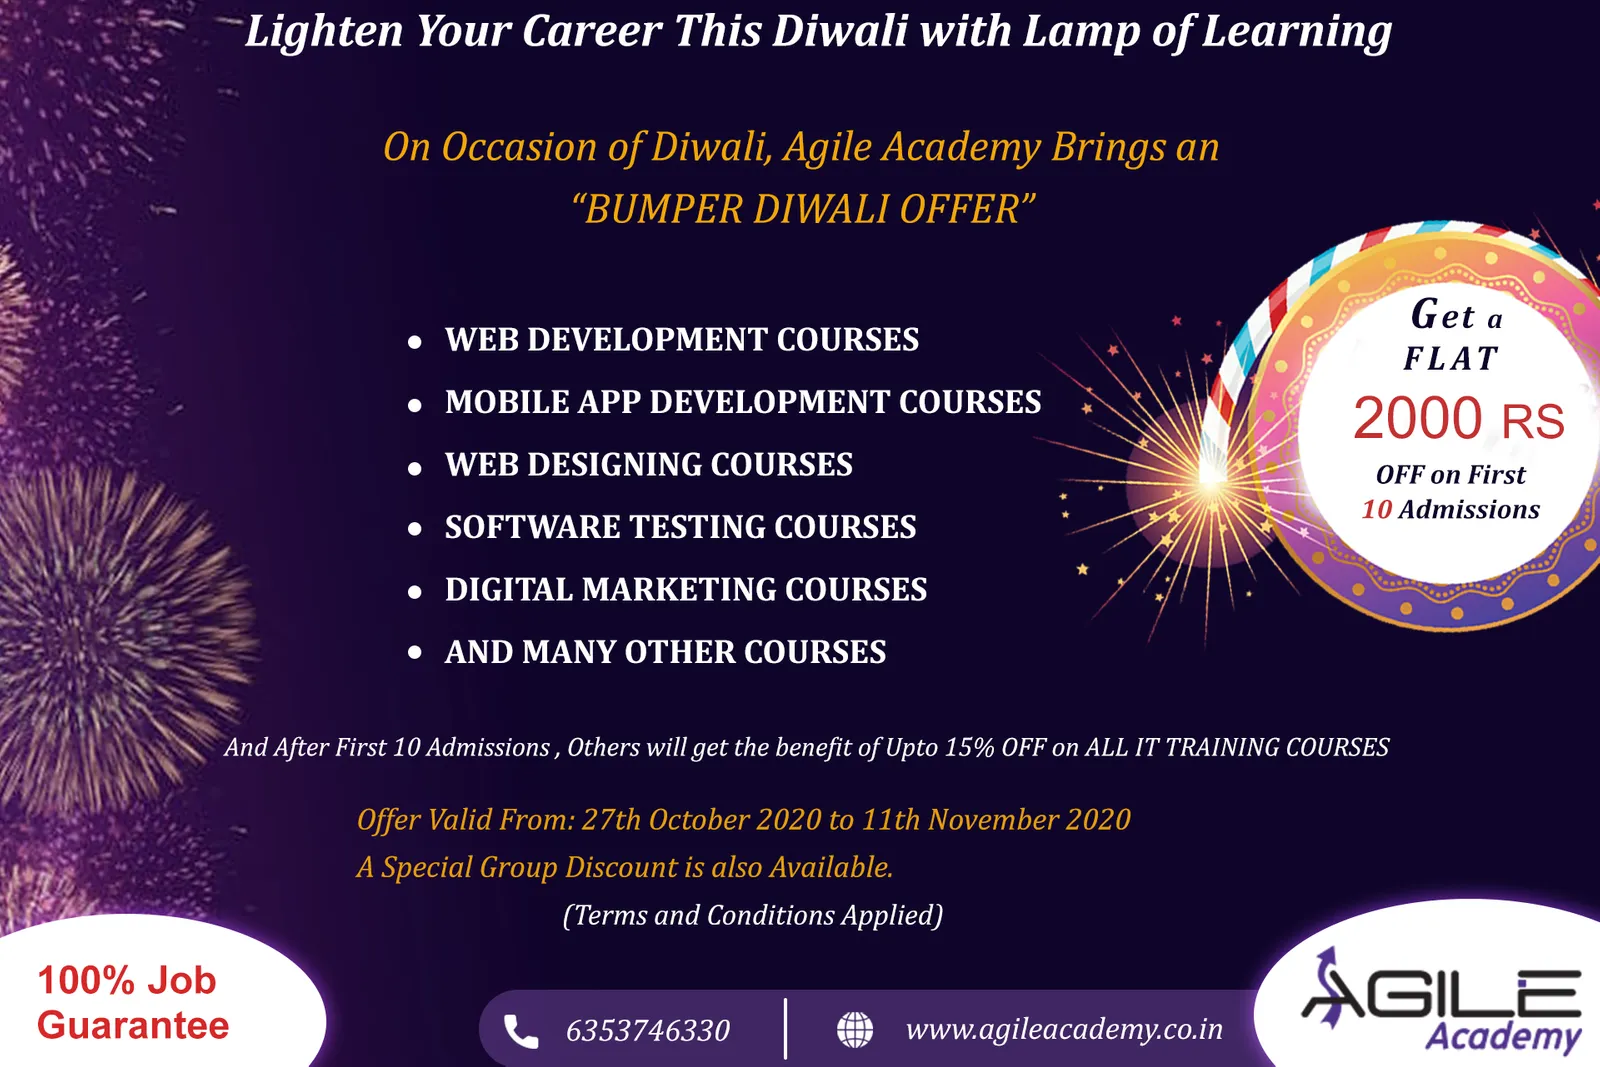 This Diwali takes a special step for your career at Agile Academy